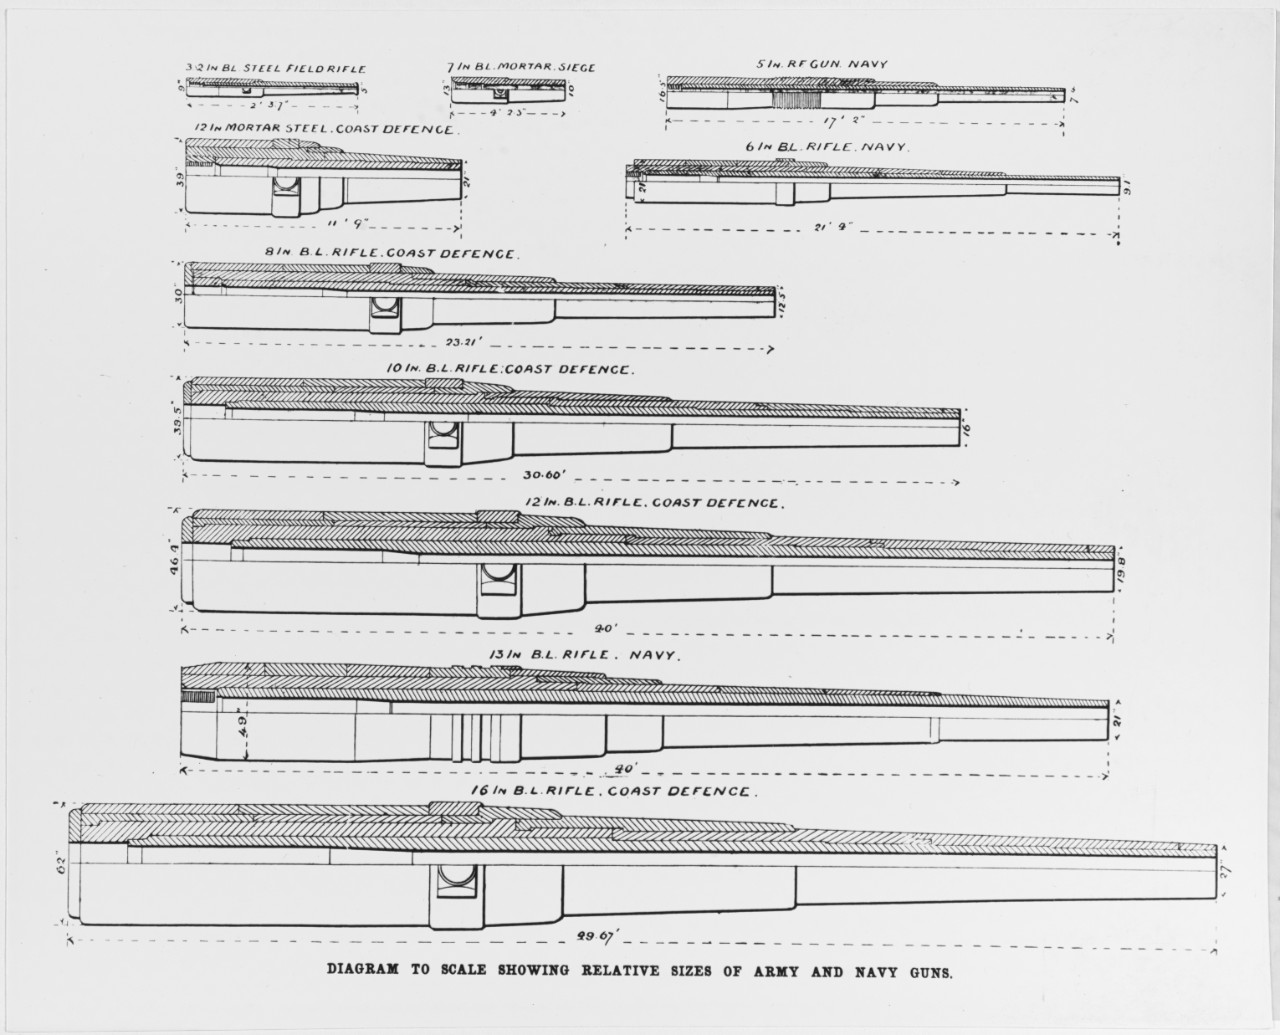 U.S. Army and Navy guns in use in 1898.